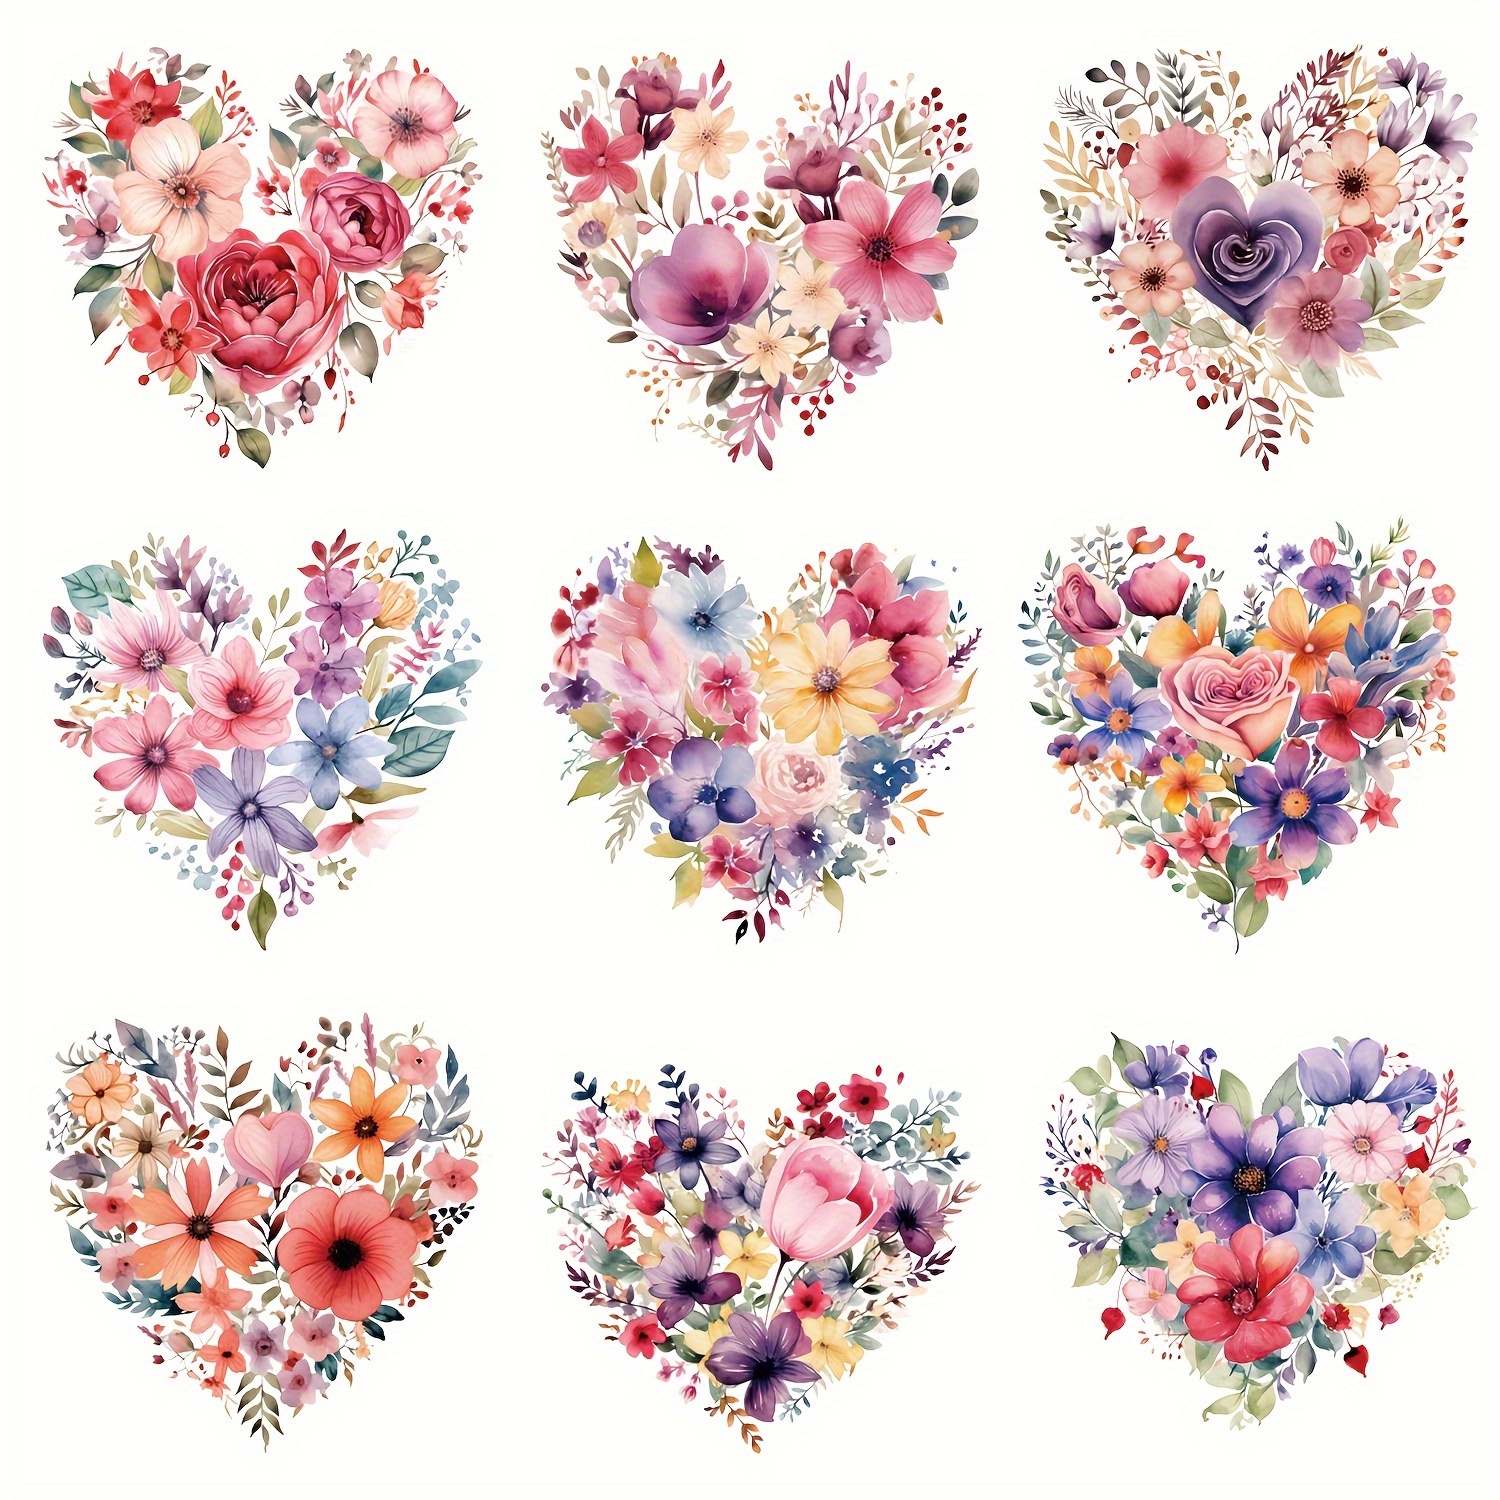 

9pcs Watercolor Floral Heart Iron-on Transfers, Vinyl Heat Transfer Decals For Diy T-shirts, Pillows, Clothes Decoration, Washable And Durable Love Flower Stickers